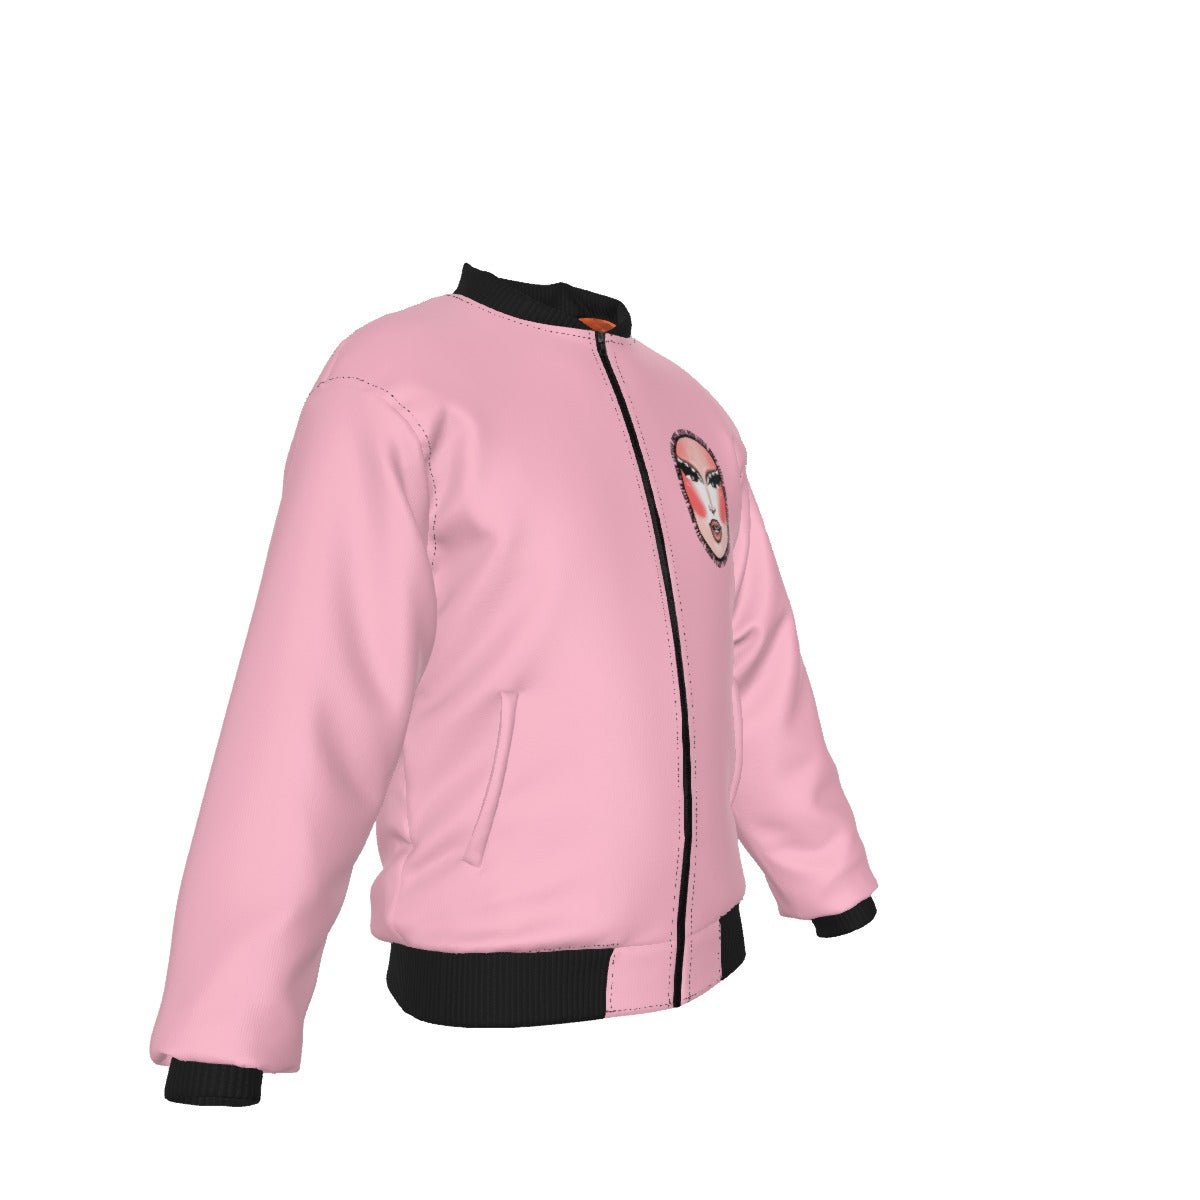 Little Piece - Add Me To The Face Time Bomber Jacket - dragqueenmerch